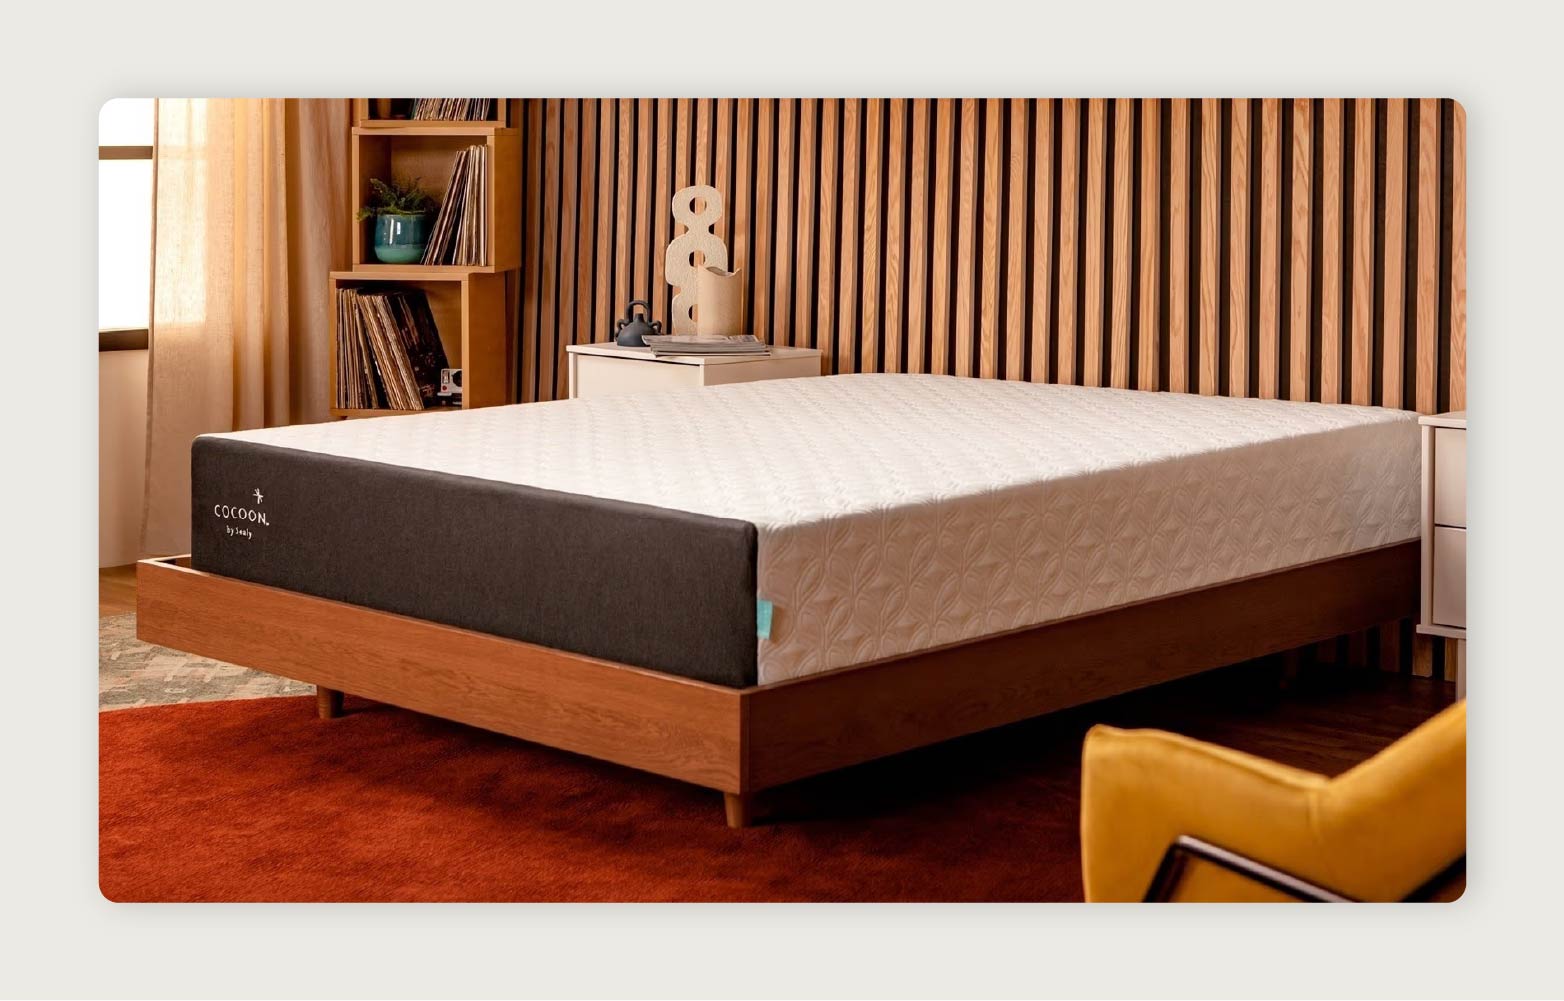 The Cocoon™ Chill Mattress by Sealy in a sleek retro room with wooden shelves featuring records and plants. 